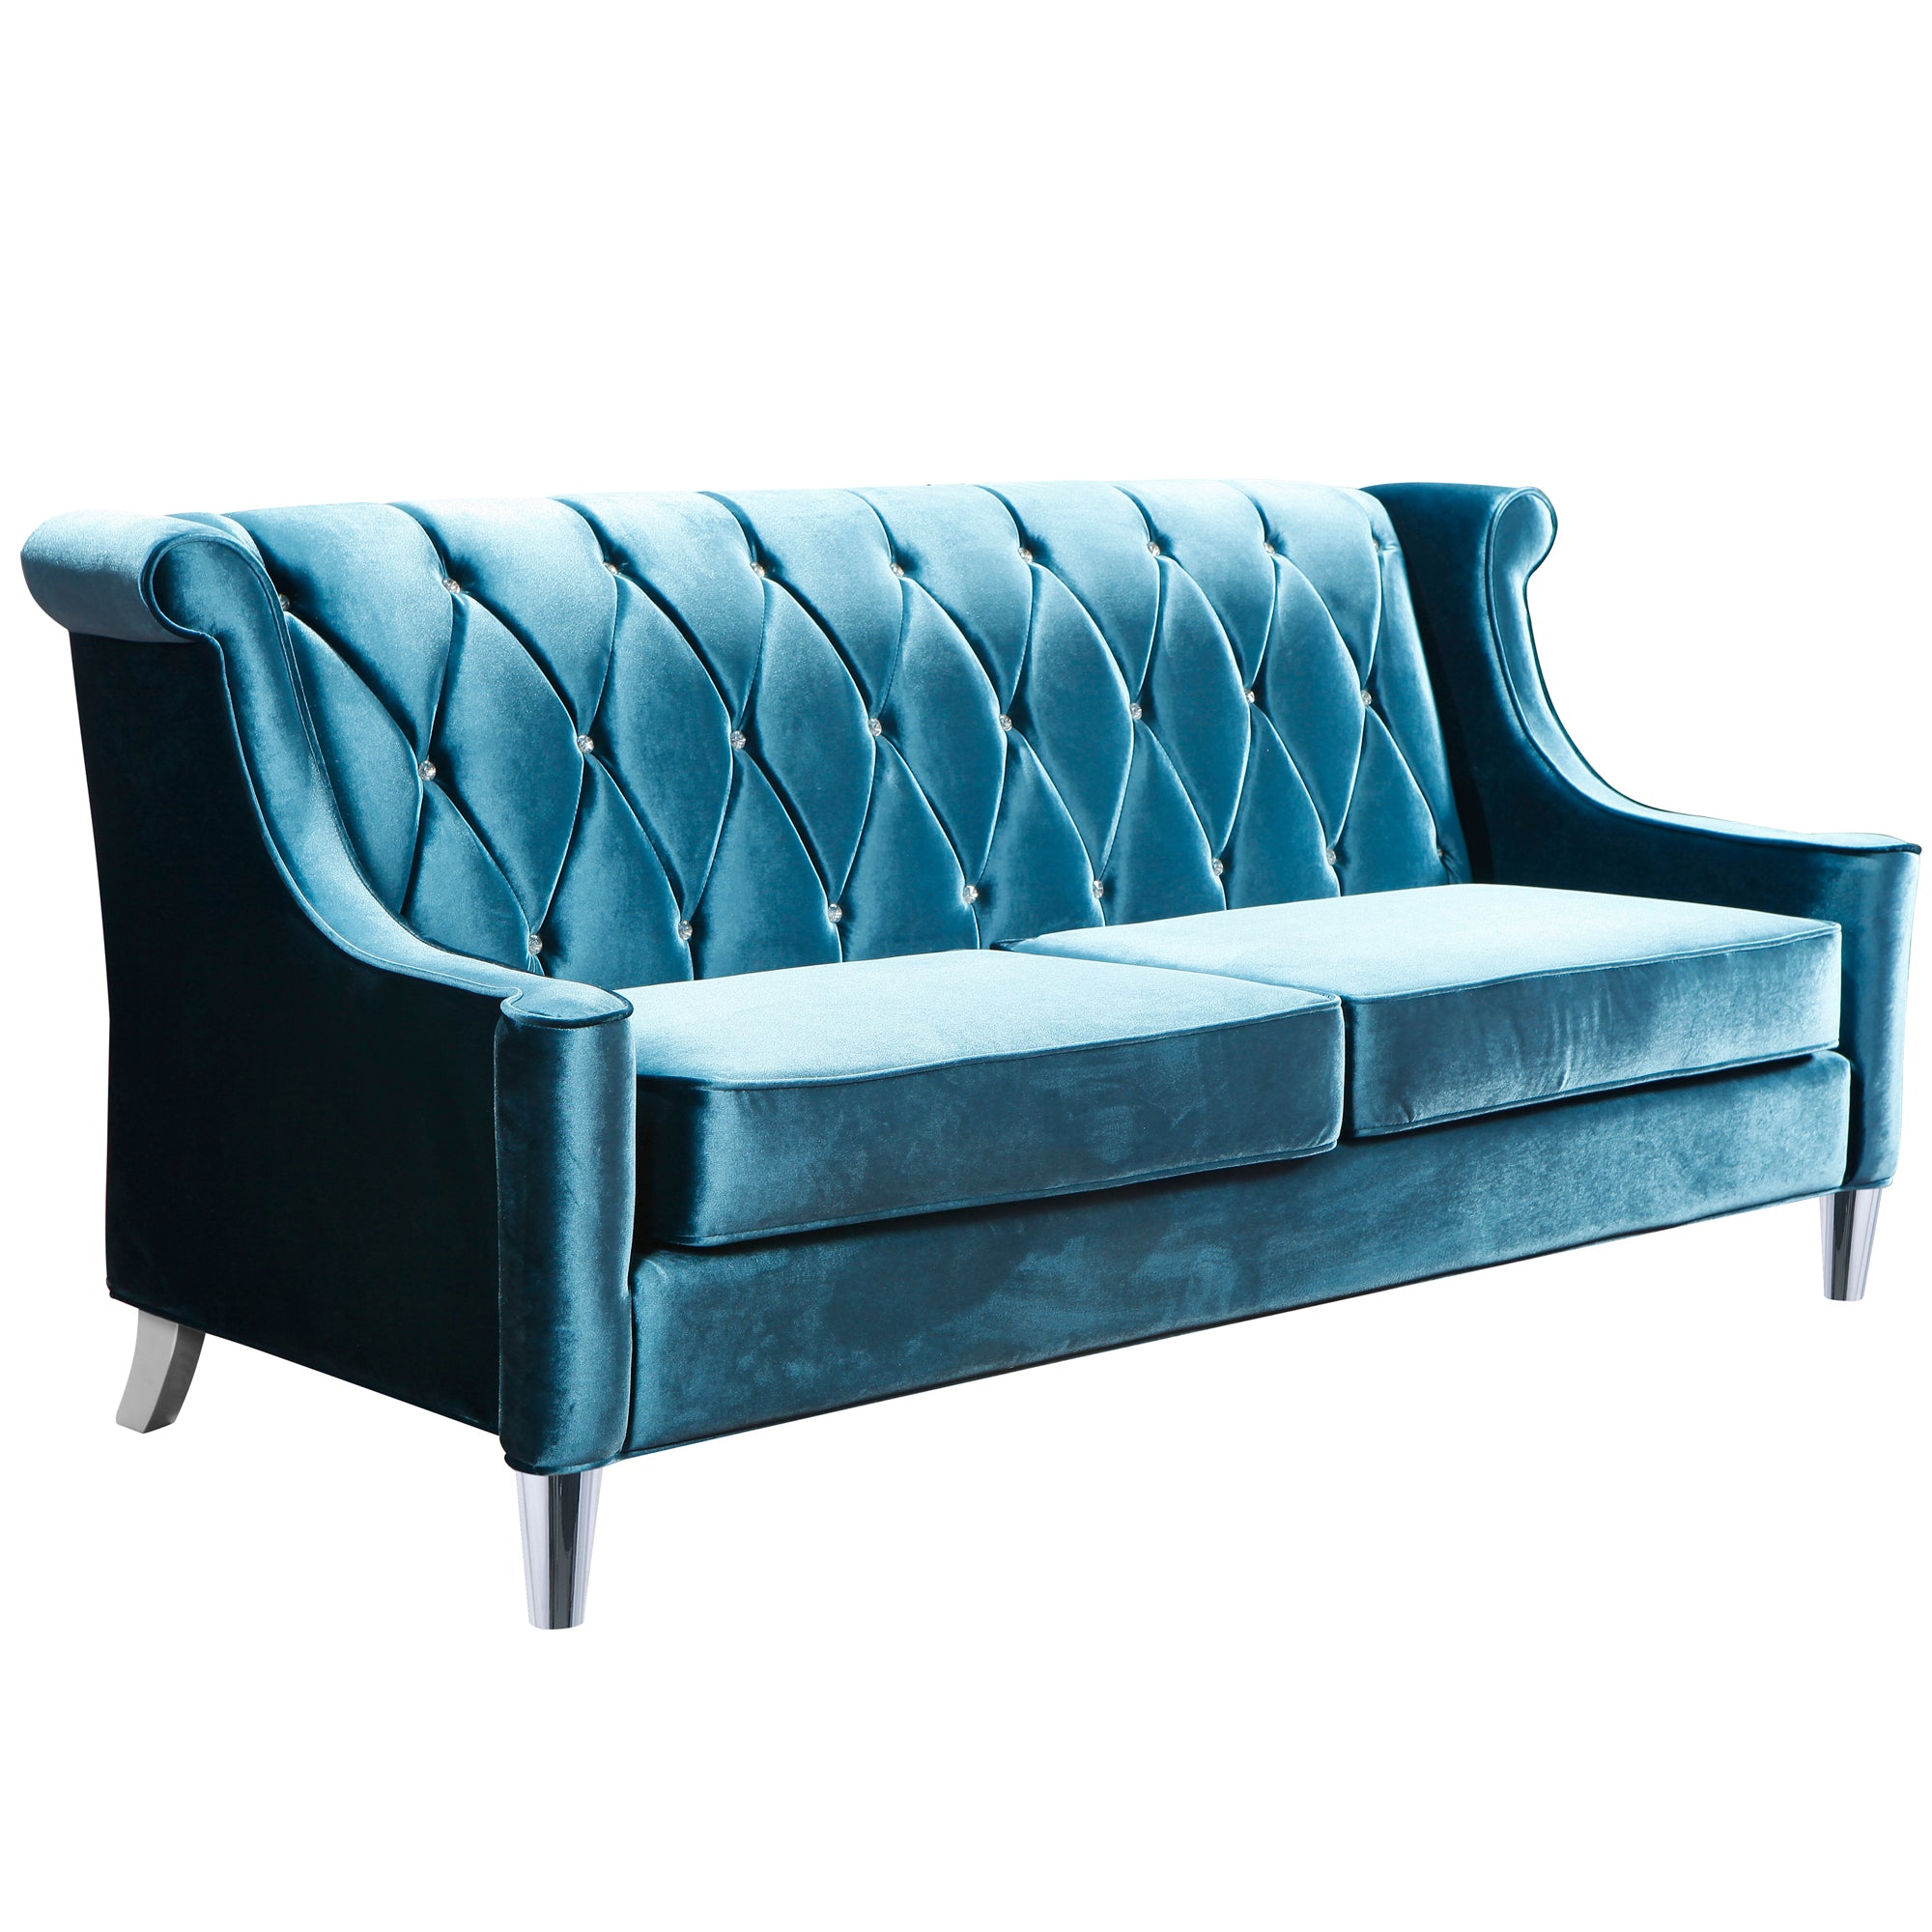 Armen Living Lc8443blue Barrister Sofa In Blue Velvet With Crystal Buttons